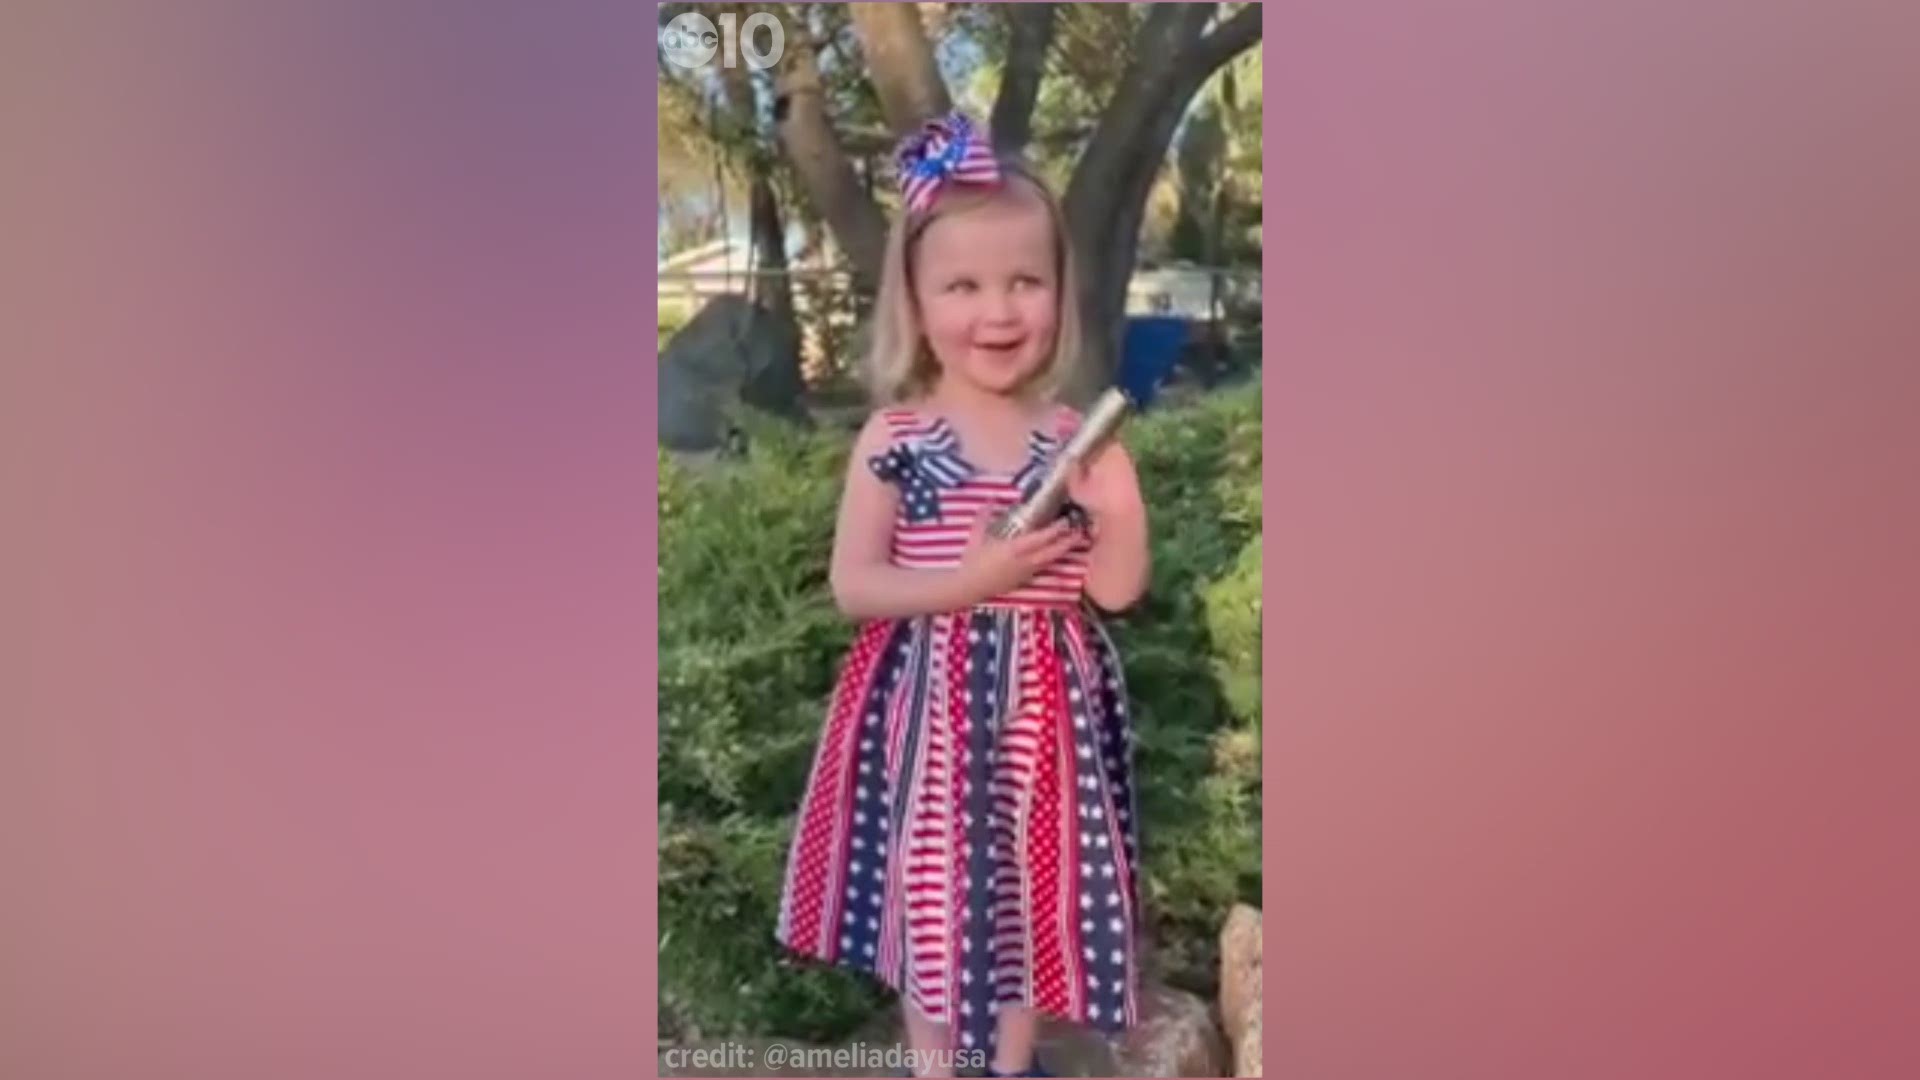 Amelia Bubenik, 2, went viral earlier this year for her rendition of the National Anthem in honor of Memorial Day. Now, she's back with a song for Veterans Day.